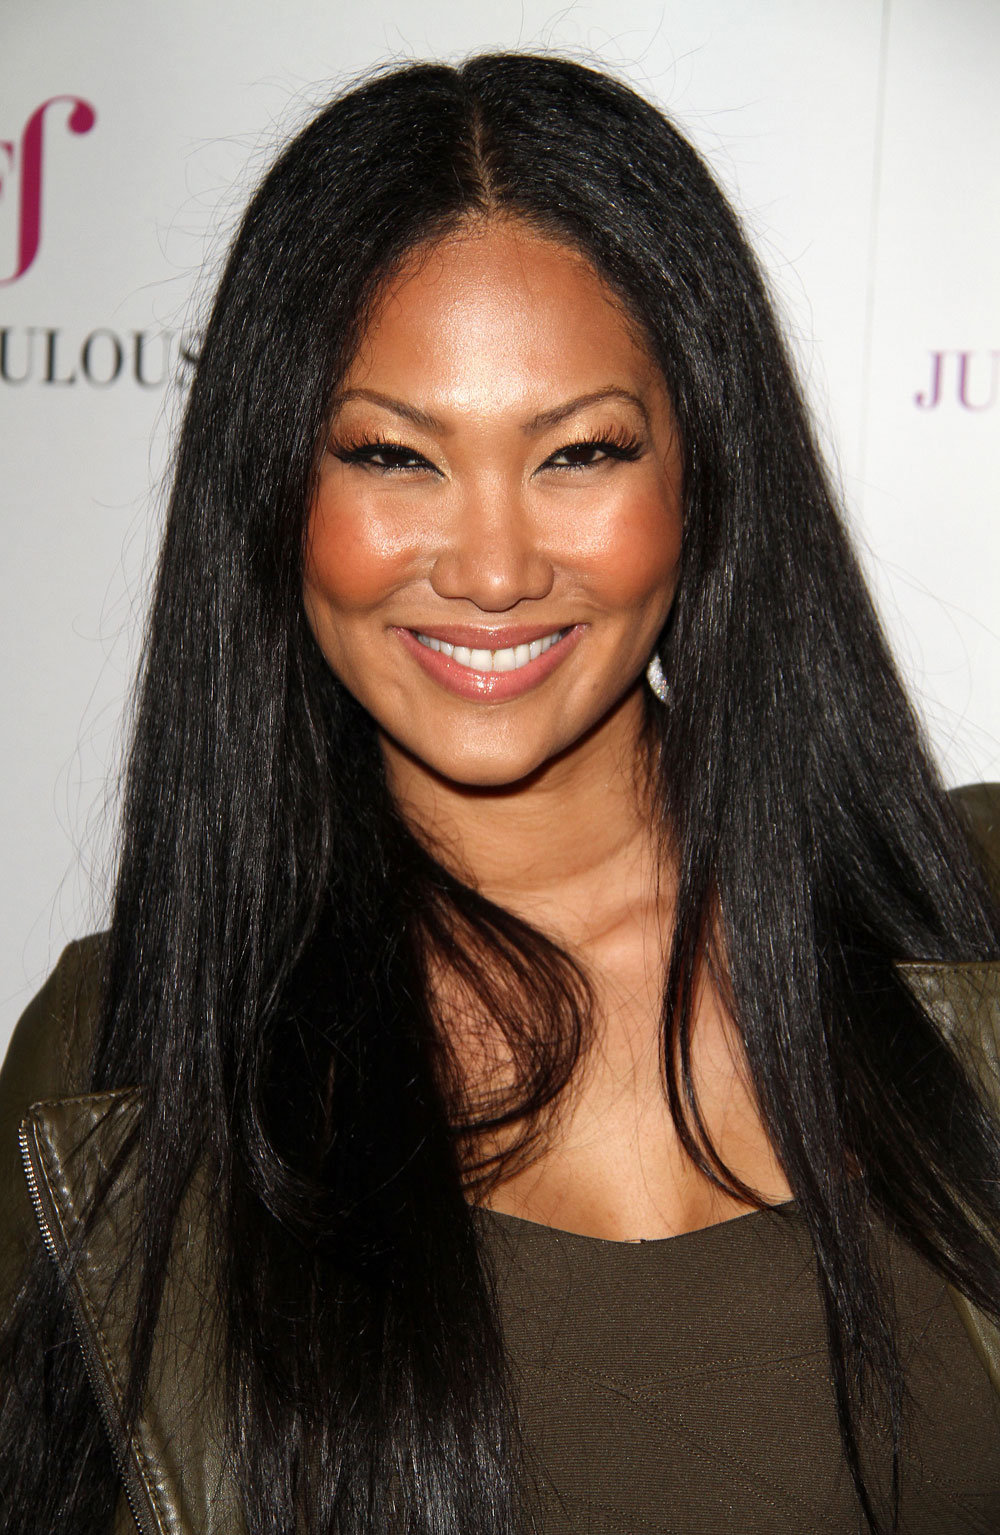 Kimora Lee Simmons: I feel sexy no matter what my size.